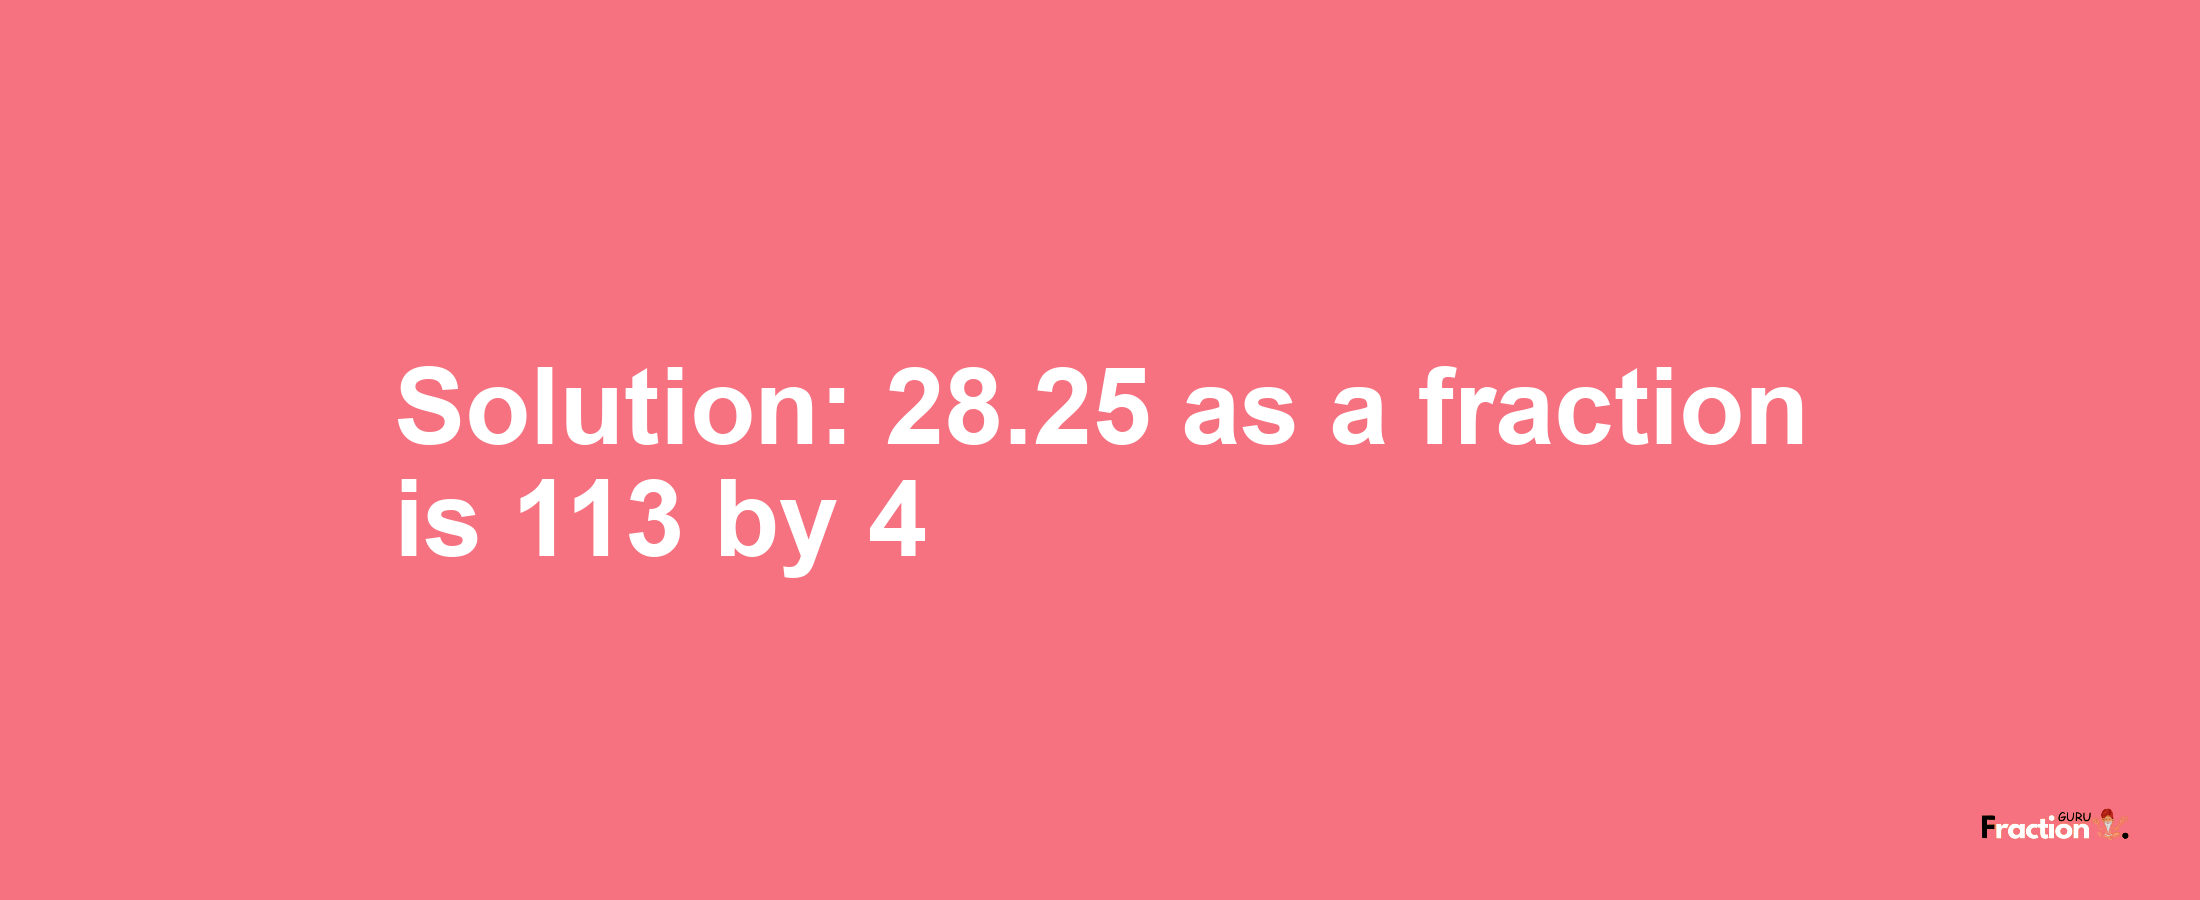 Solution:28.25 as a fraction is 113/4